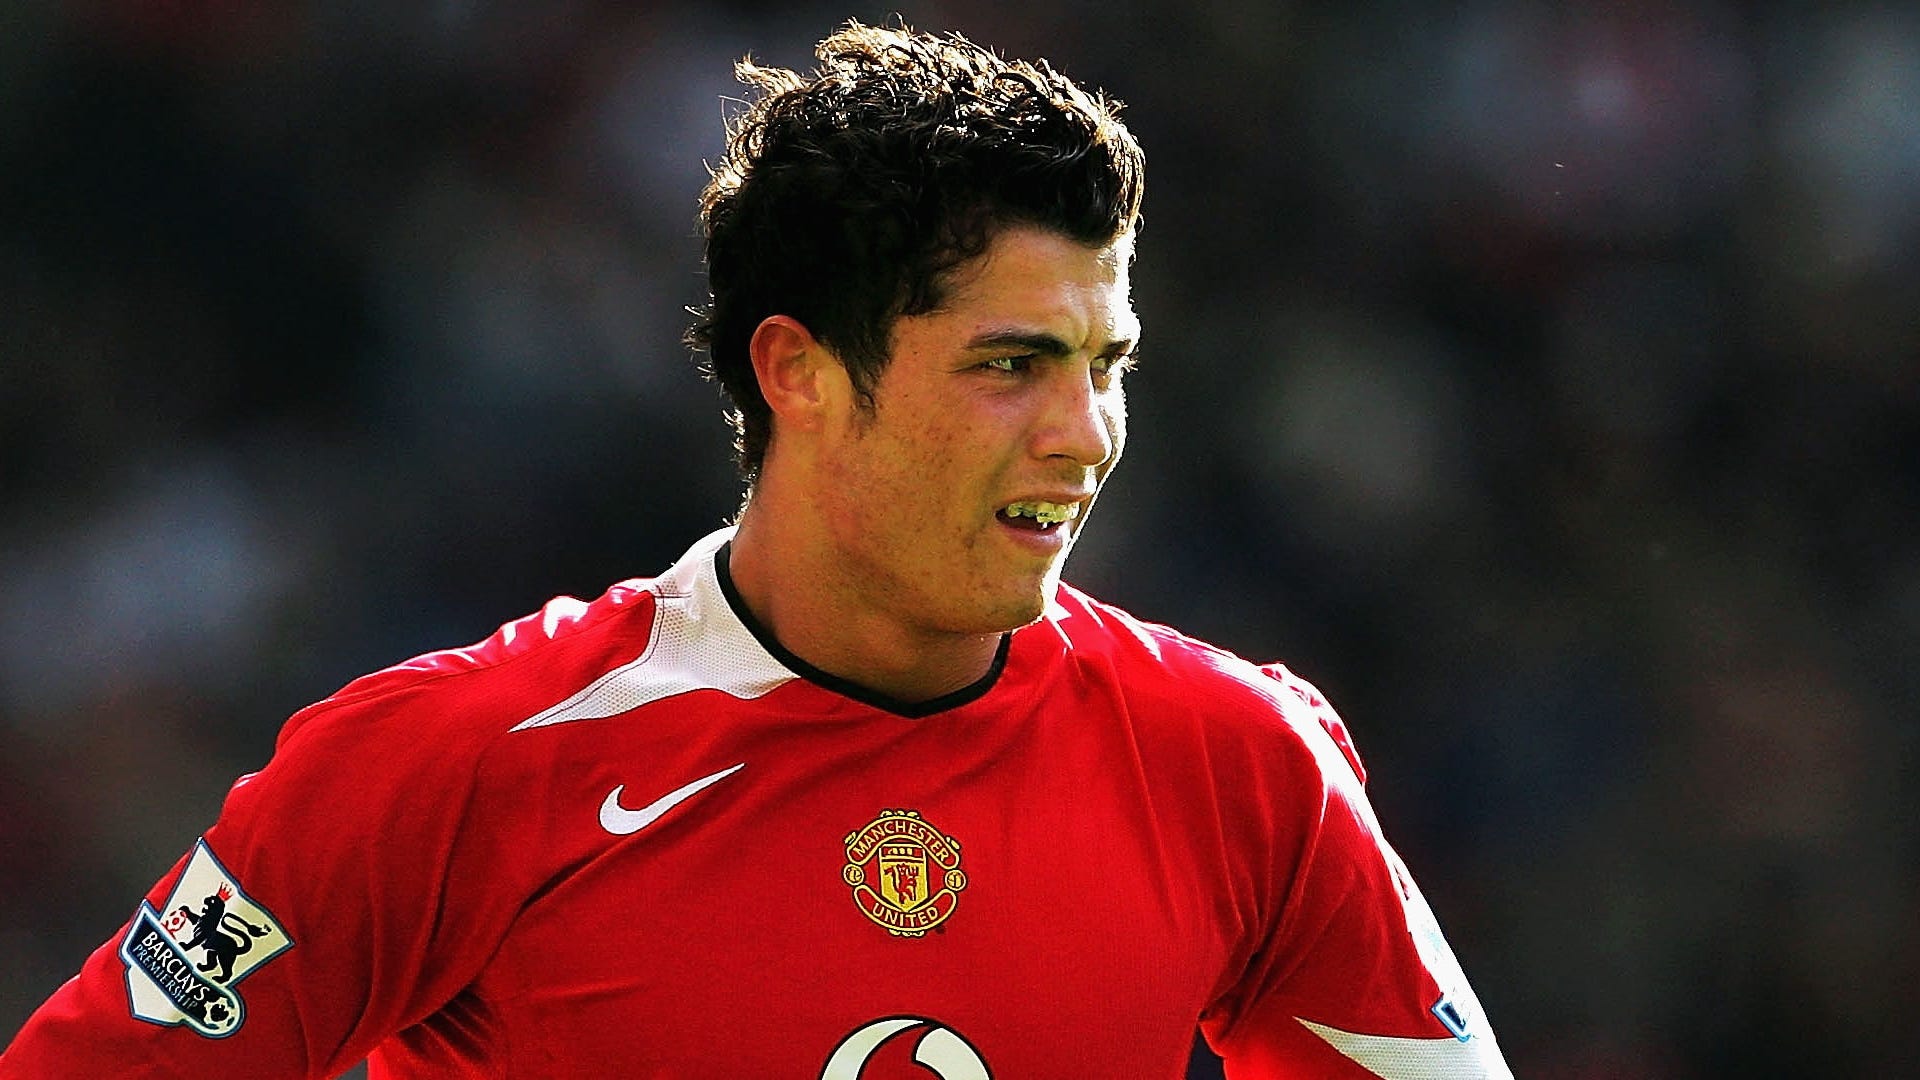 Cristiano Ronaldo of Manchester United in action during the Barclays